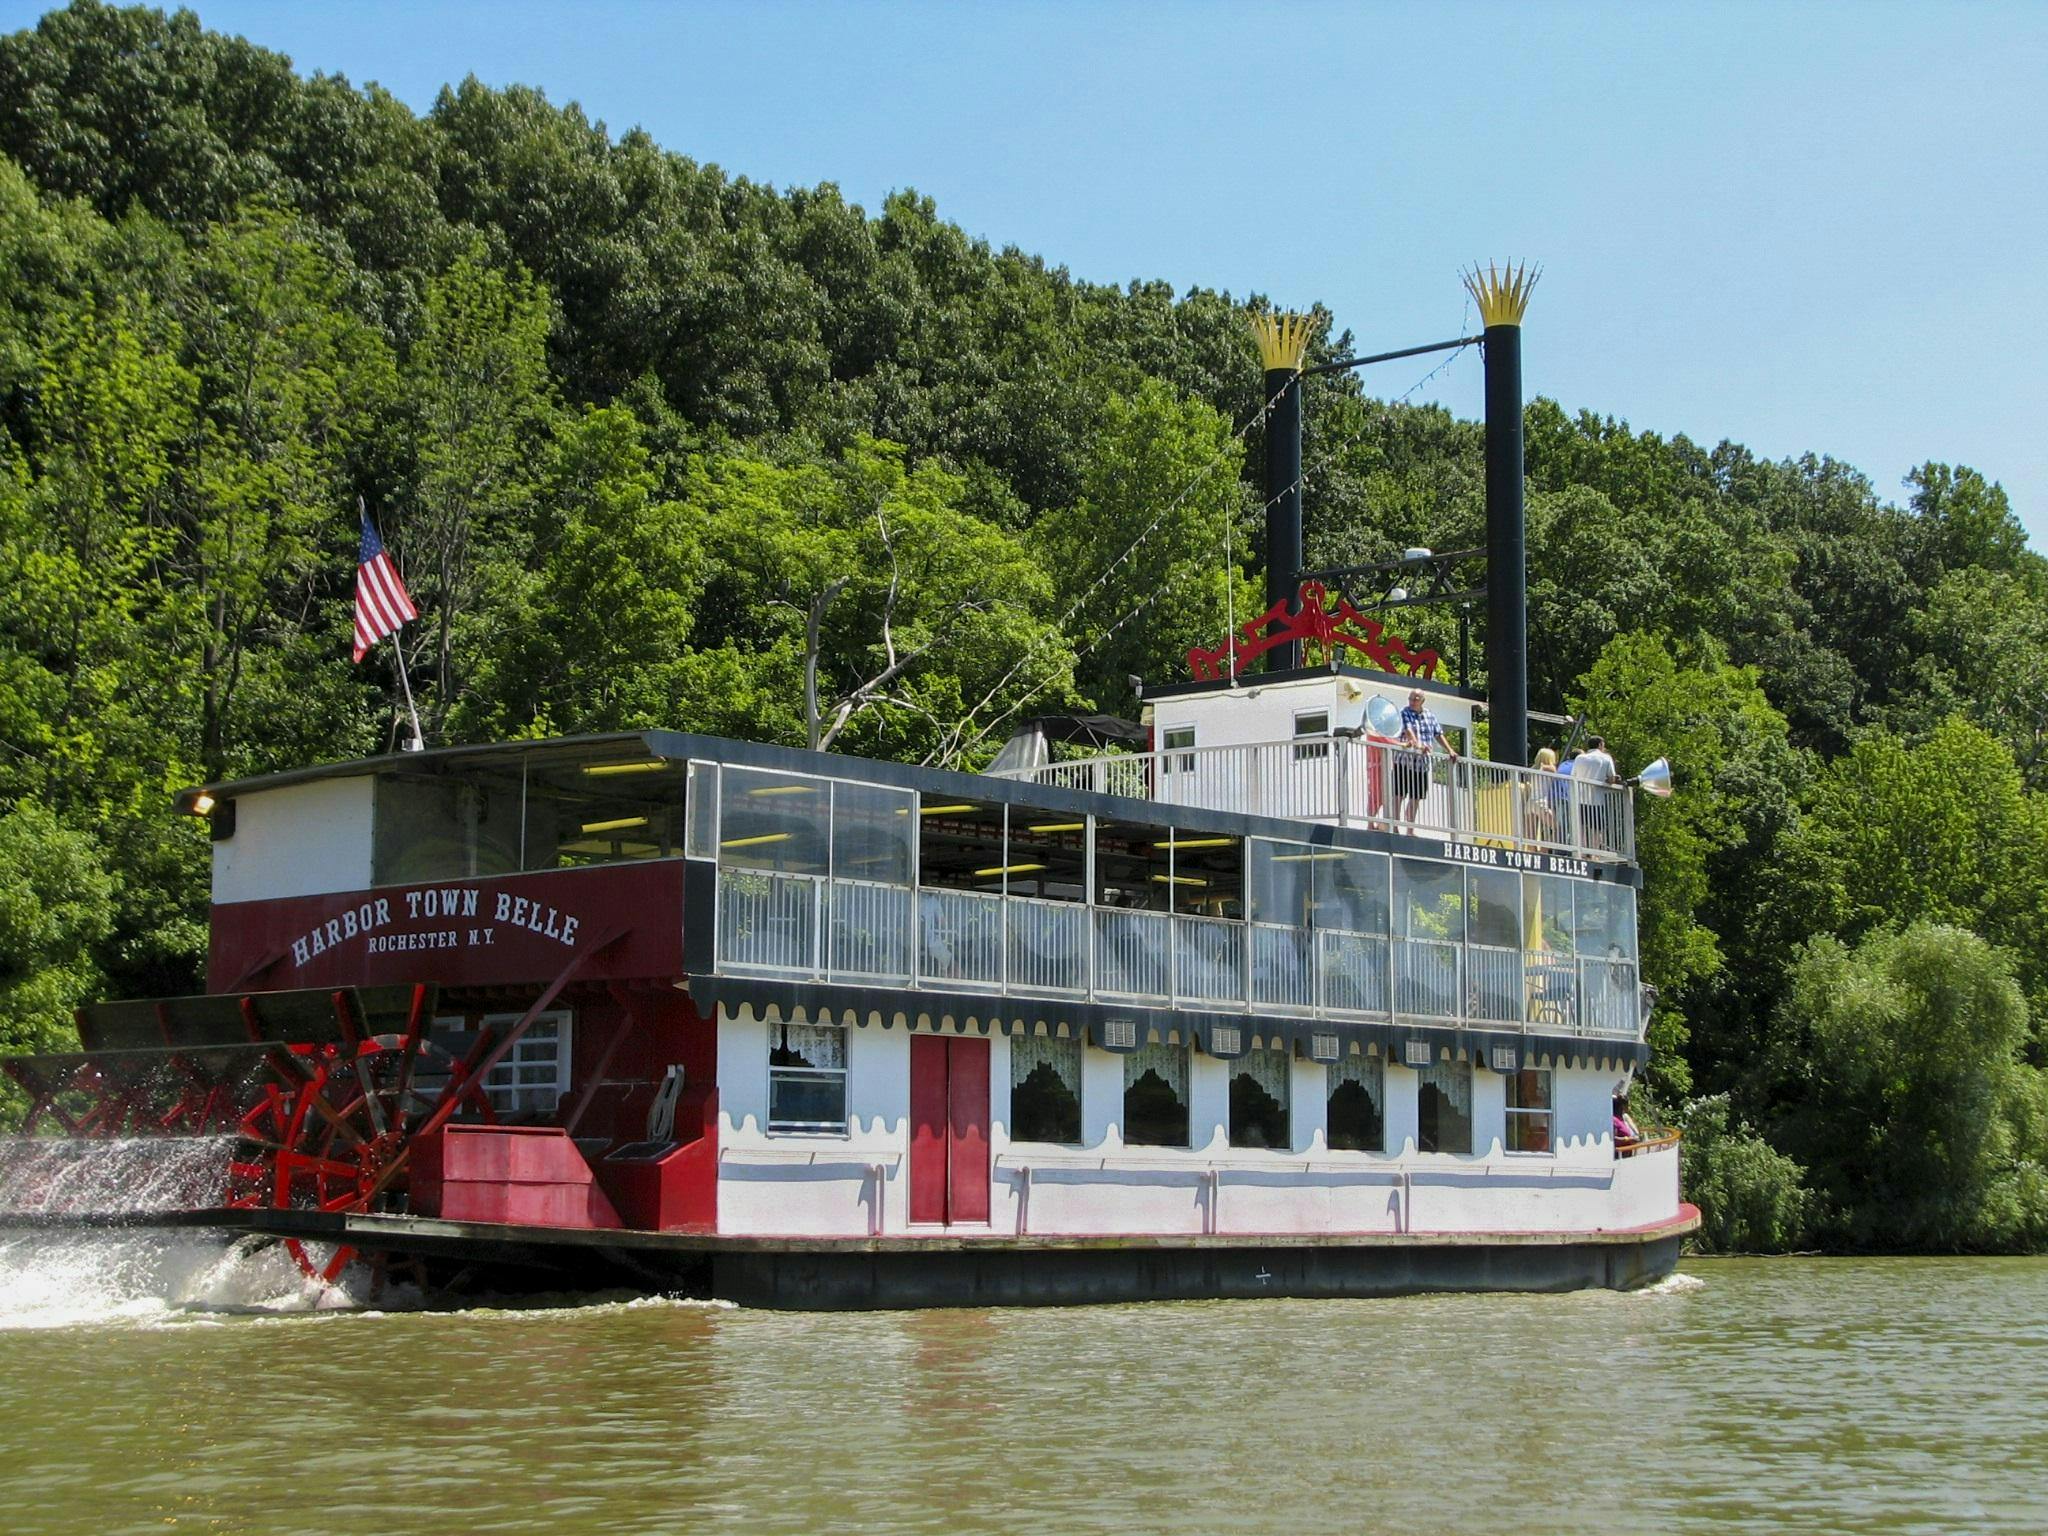 Cruise into the Lower Genesee River Gorge